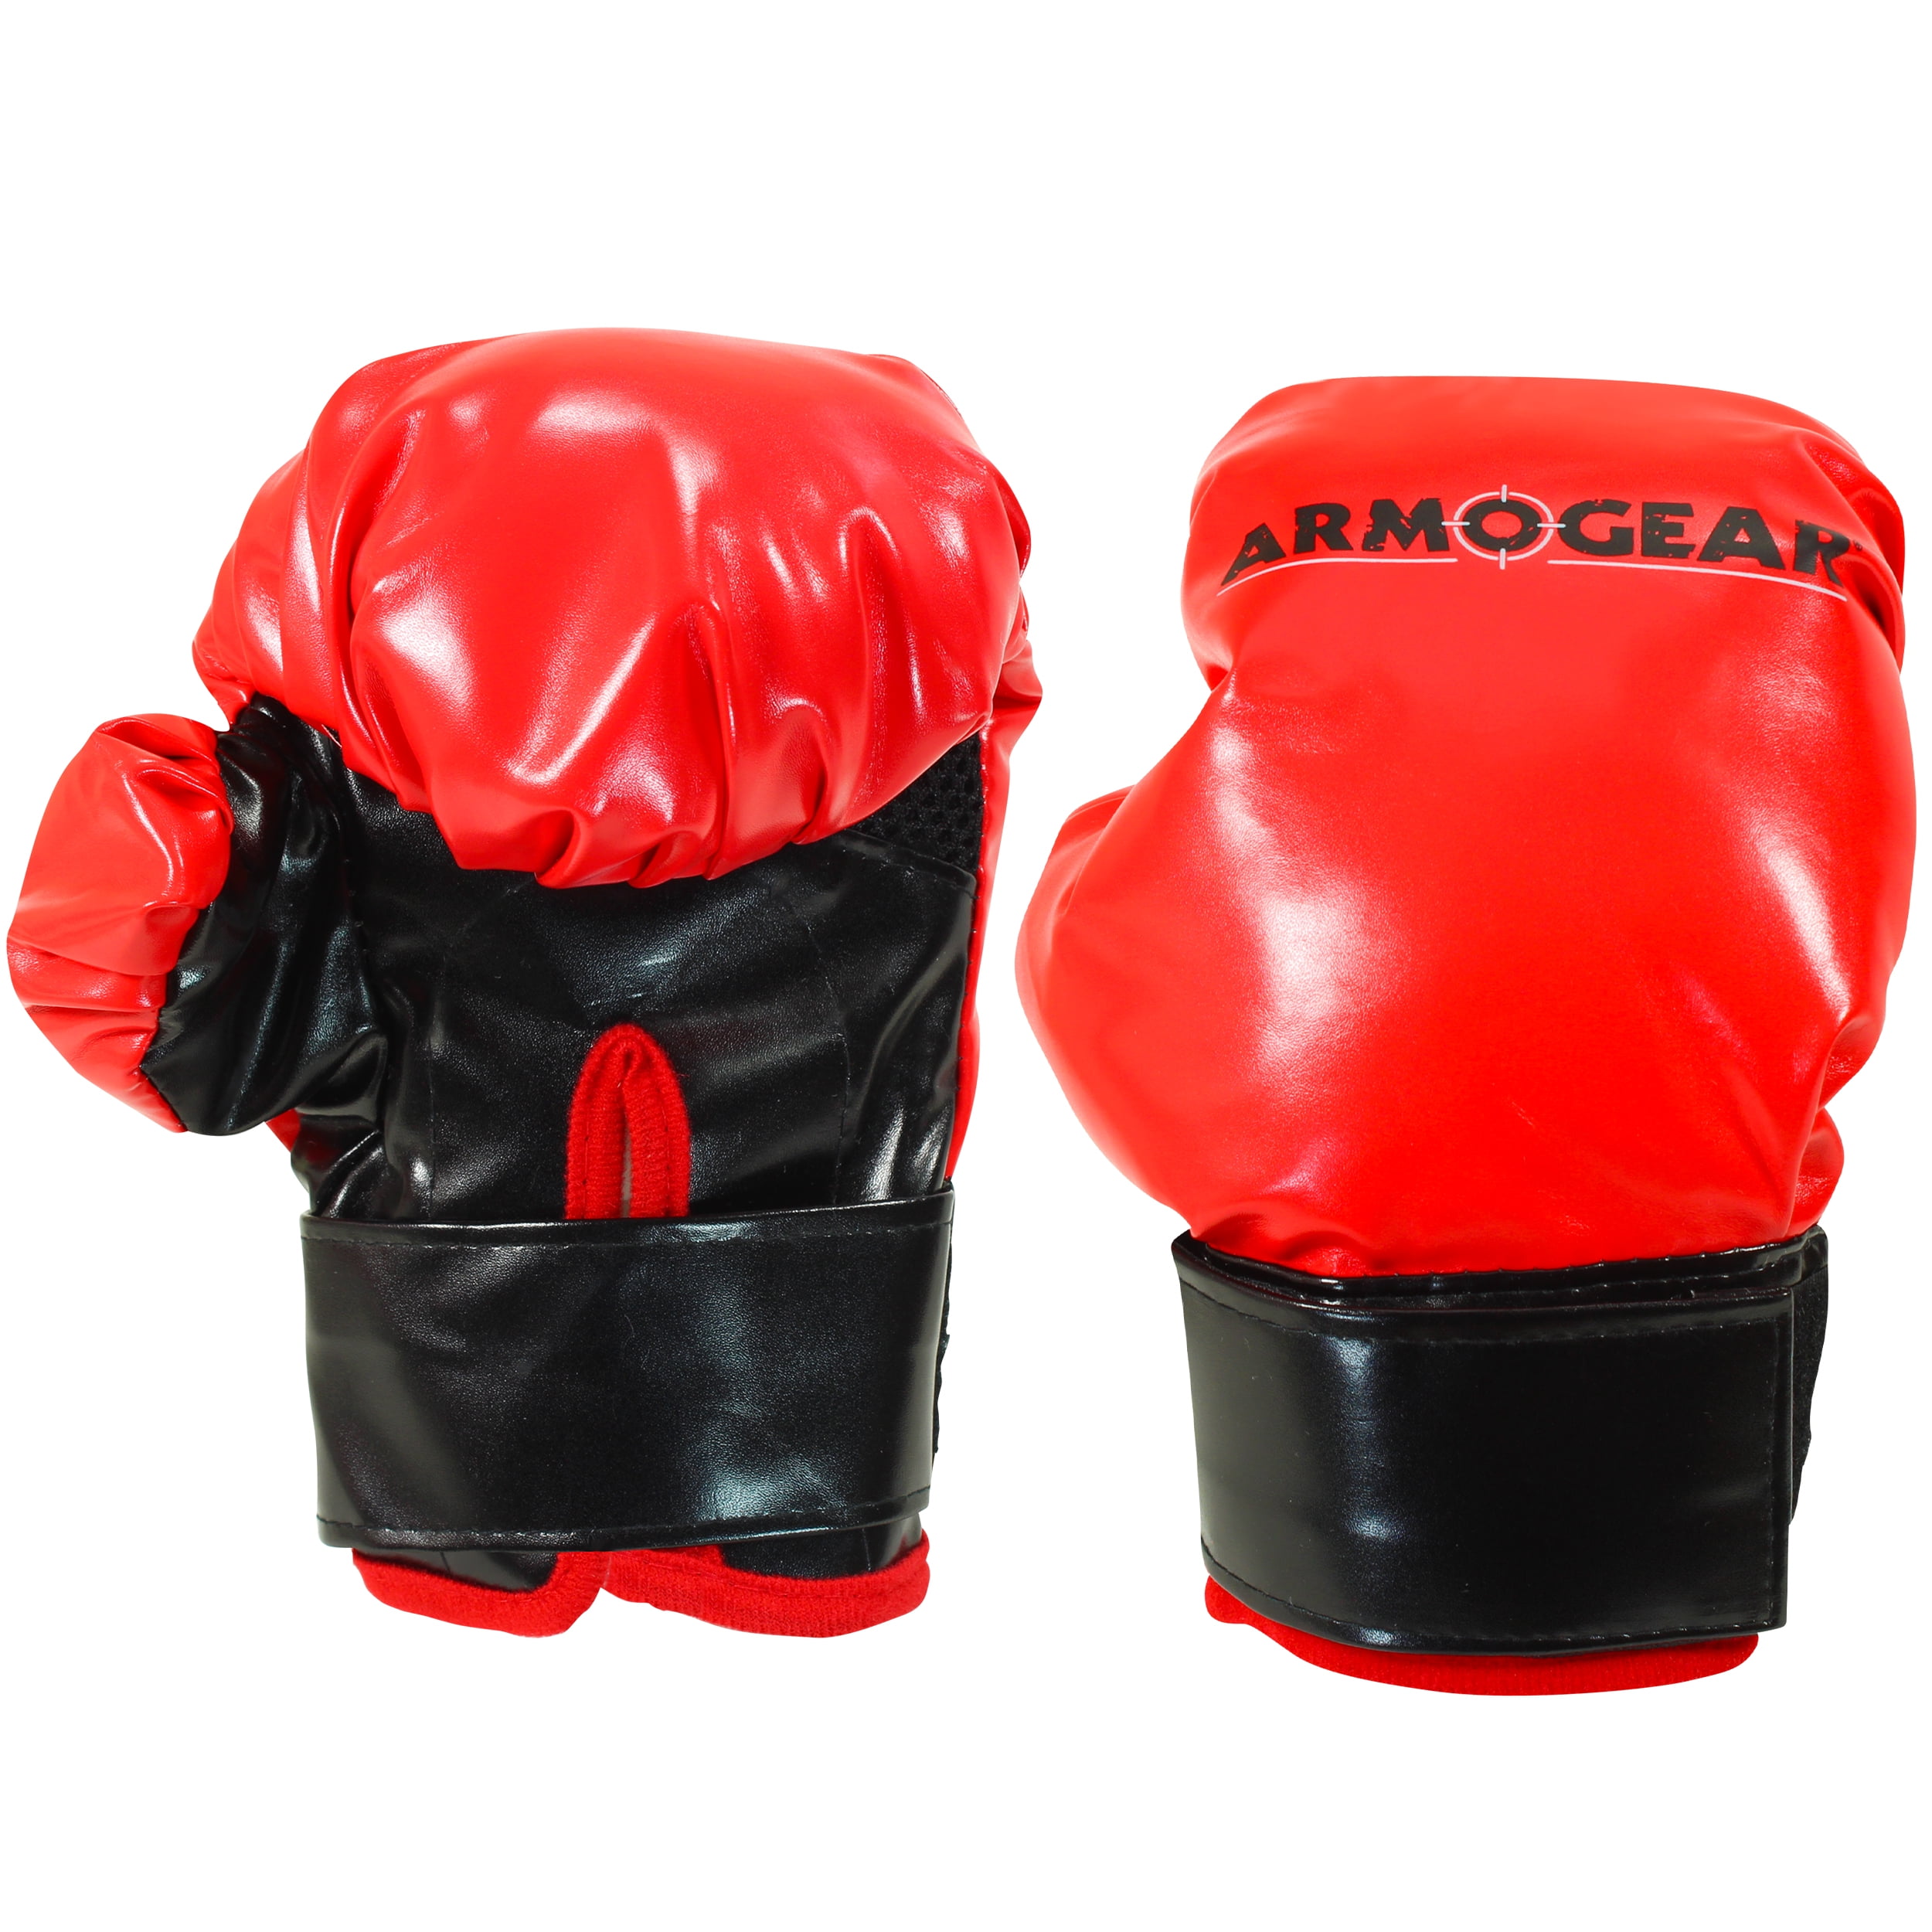 Velcro Toys & Games Sports & Outdoor Recreation Martial Arts & Boxing Boxing Gloves Customized Winning Boxing Gloves 